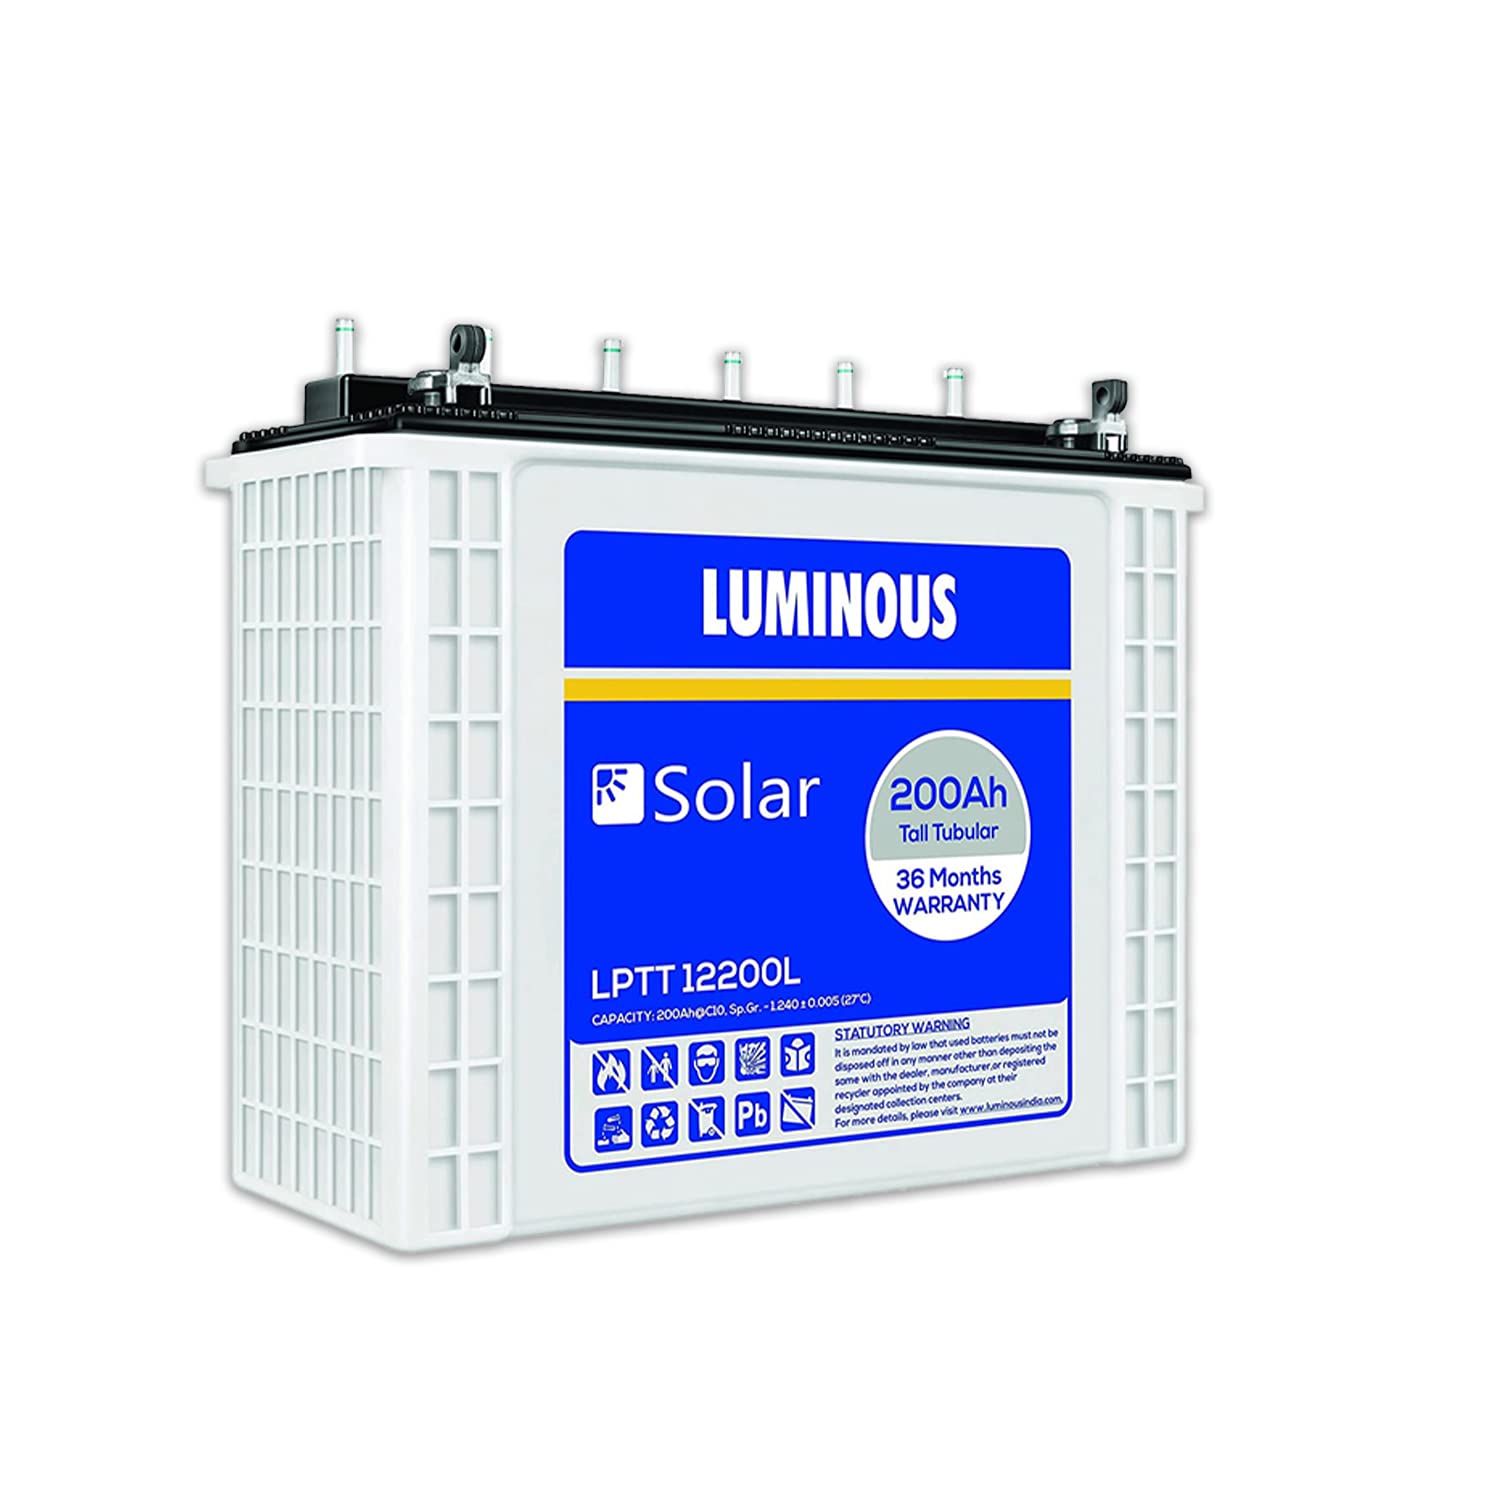 Luminous Solar LPTT12200L 200 Ah Tall Tubular Inverter Battery for Home, Office & Shop with 36 Months Warranty (White Container & Black Cover)
